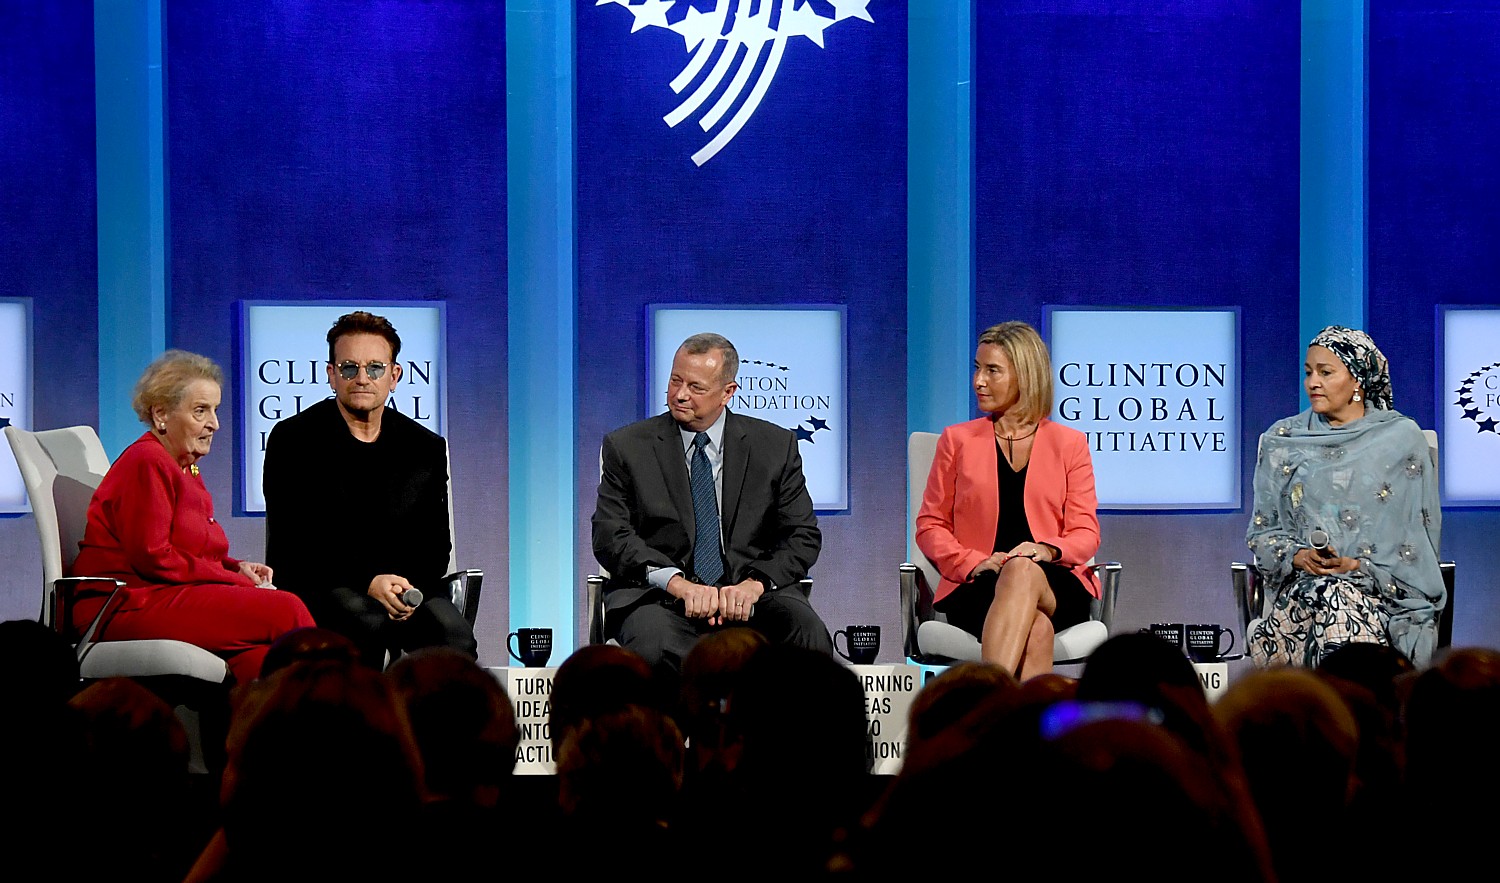 Madeleine K. Albright, chair , Albright Stonebridge Group chairs panel with Bono, lead singer of U2 and co-founder of ONE Campaign; John R. Allen, Brookings Institution, Frederica Mogherini, European Union; Amina Mohammed, Minister of Environment, Nigeria © 2016 Karen Rubin/news-photos-features.com